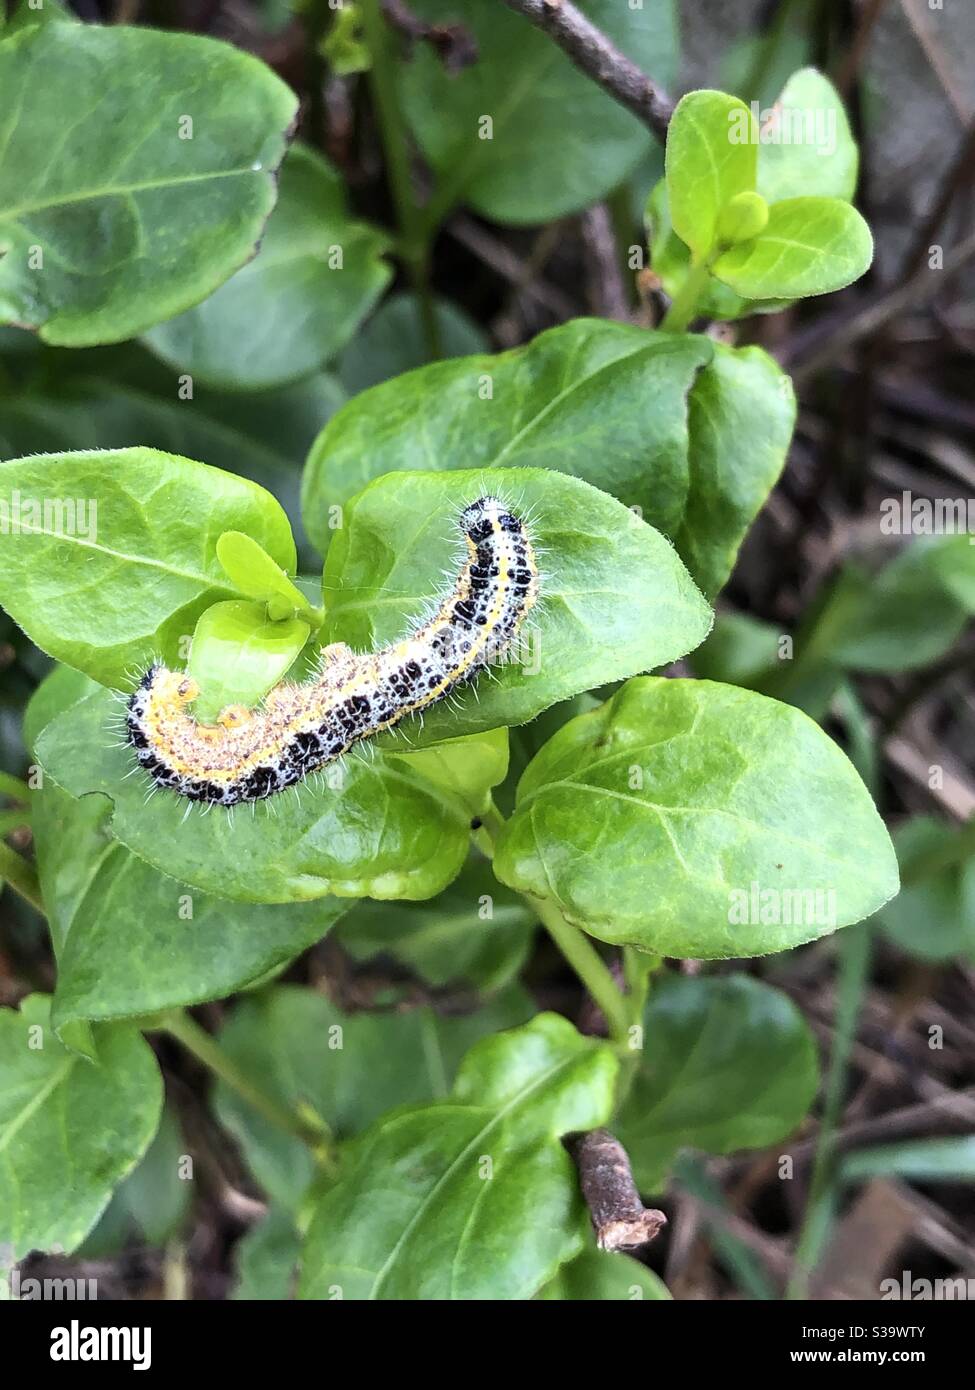 Caterpillar of cabbage white butterfly Stock Photo